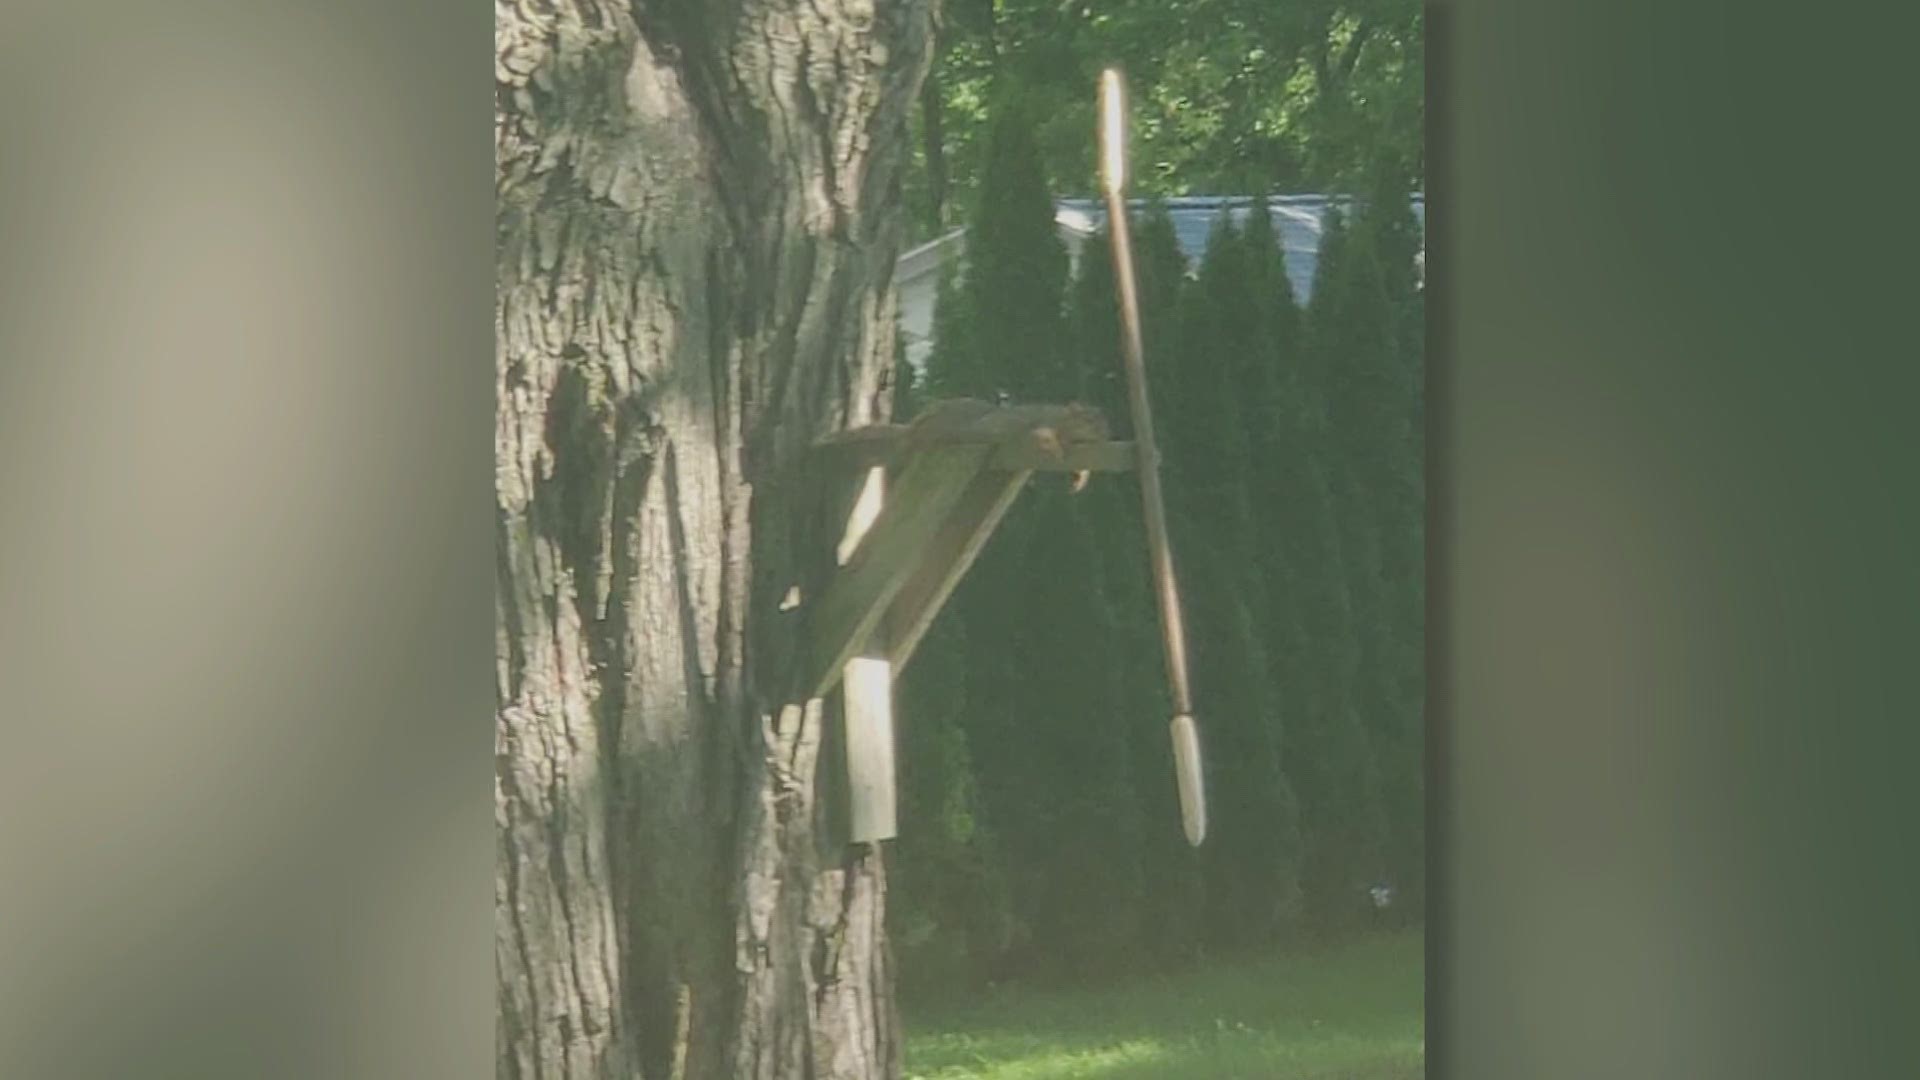 Iowans are sharing photos of a squirrel taking a break in the heat, the strawberry super moon, and more ways to stay zen.